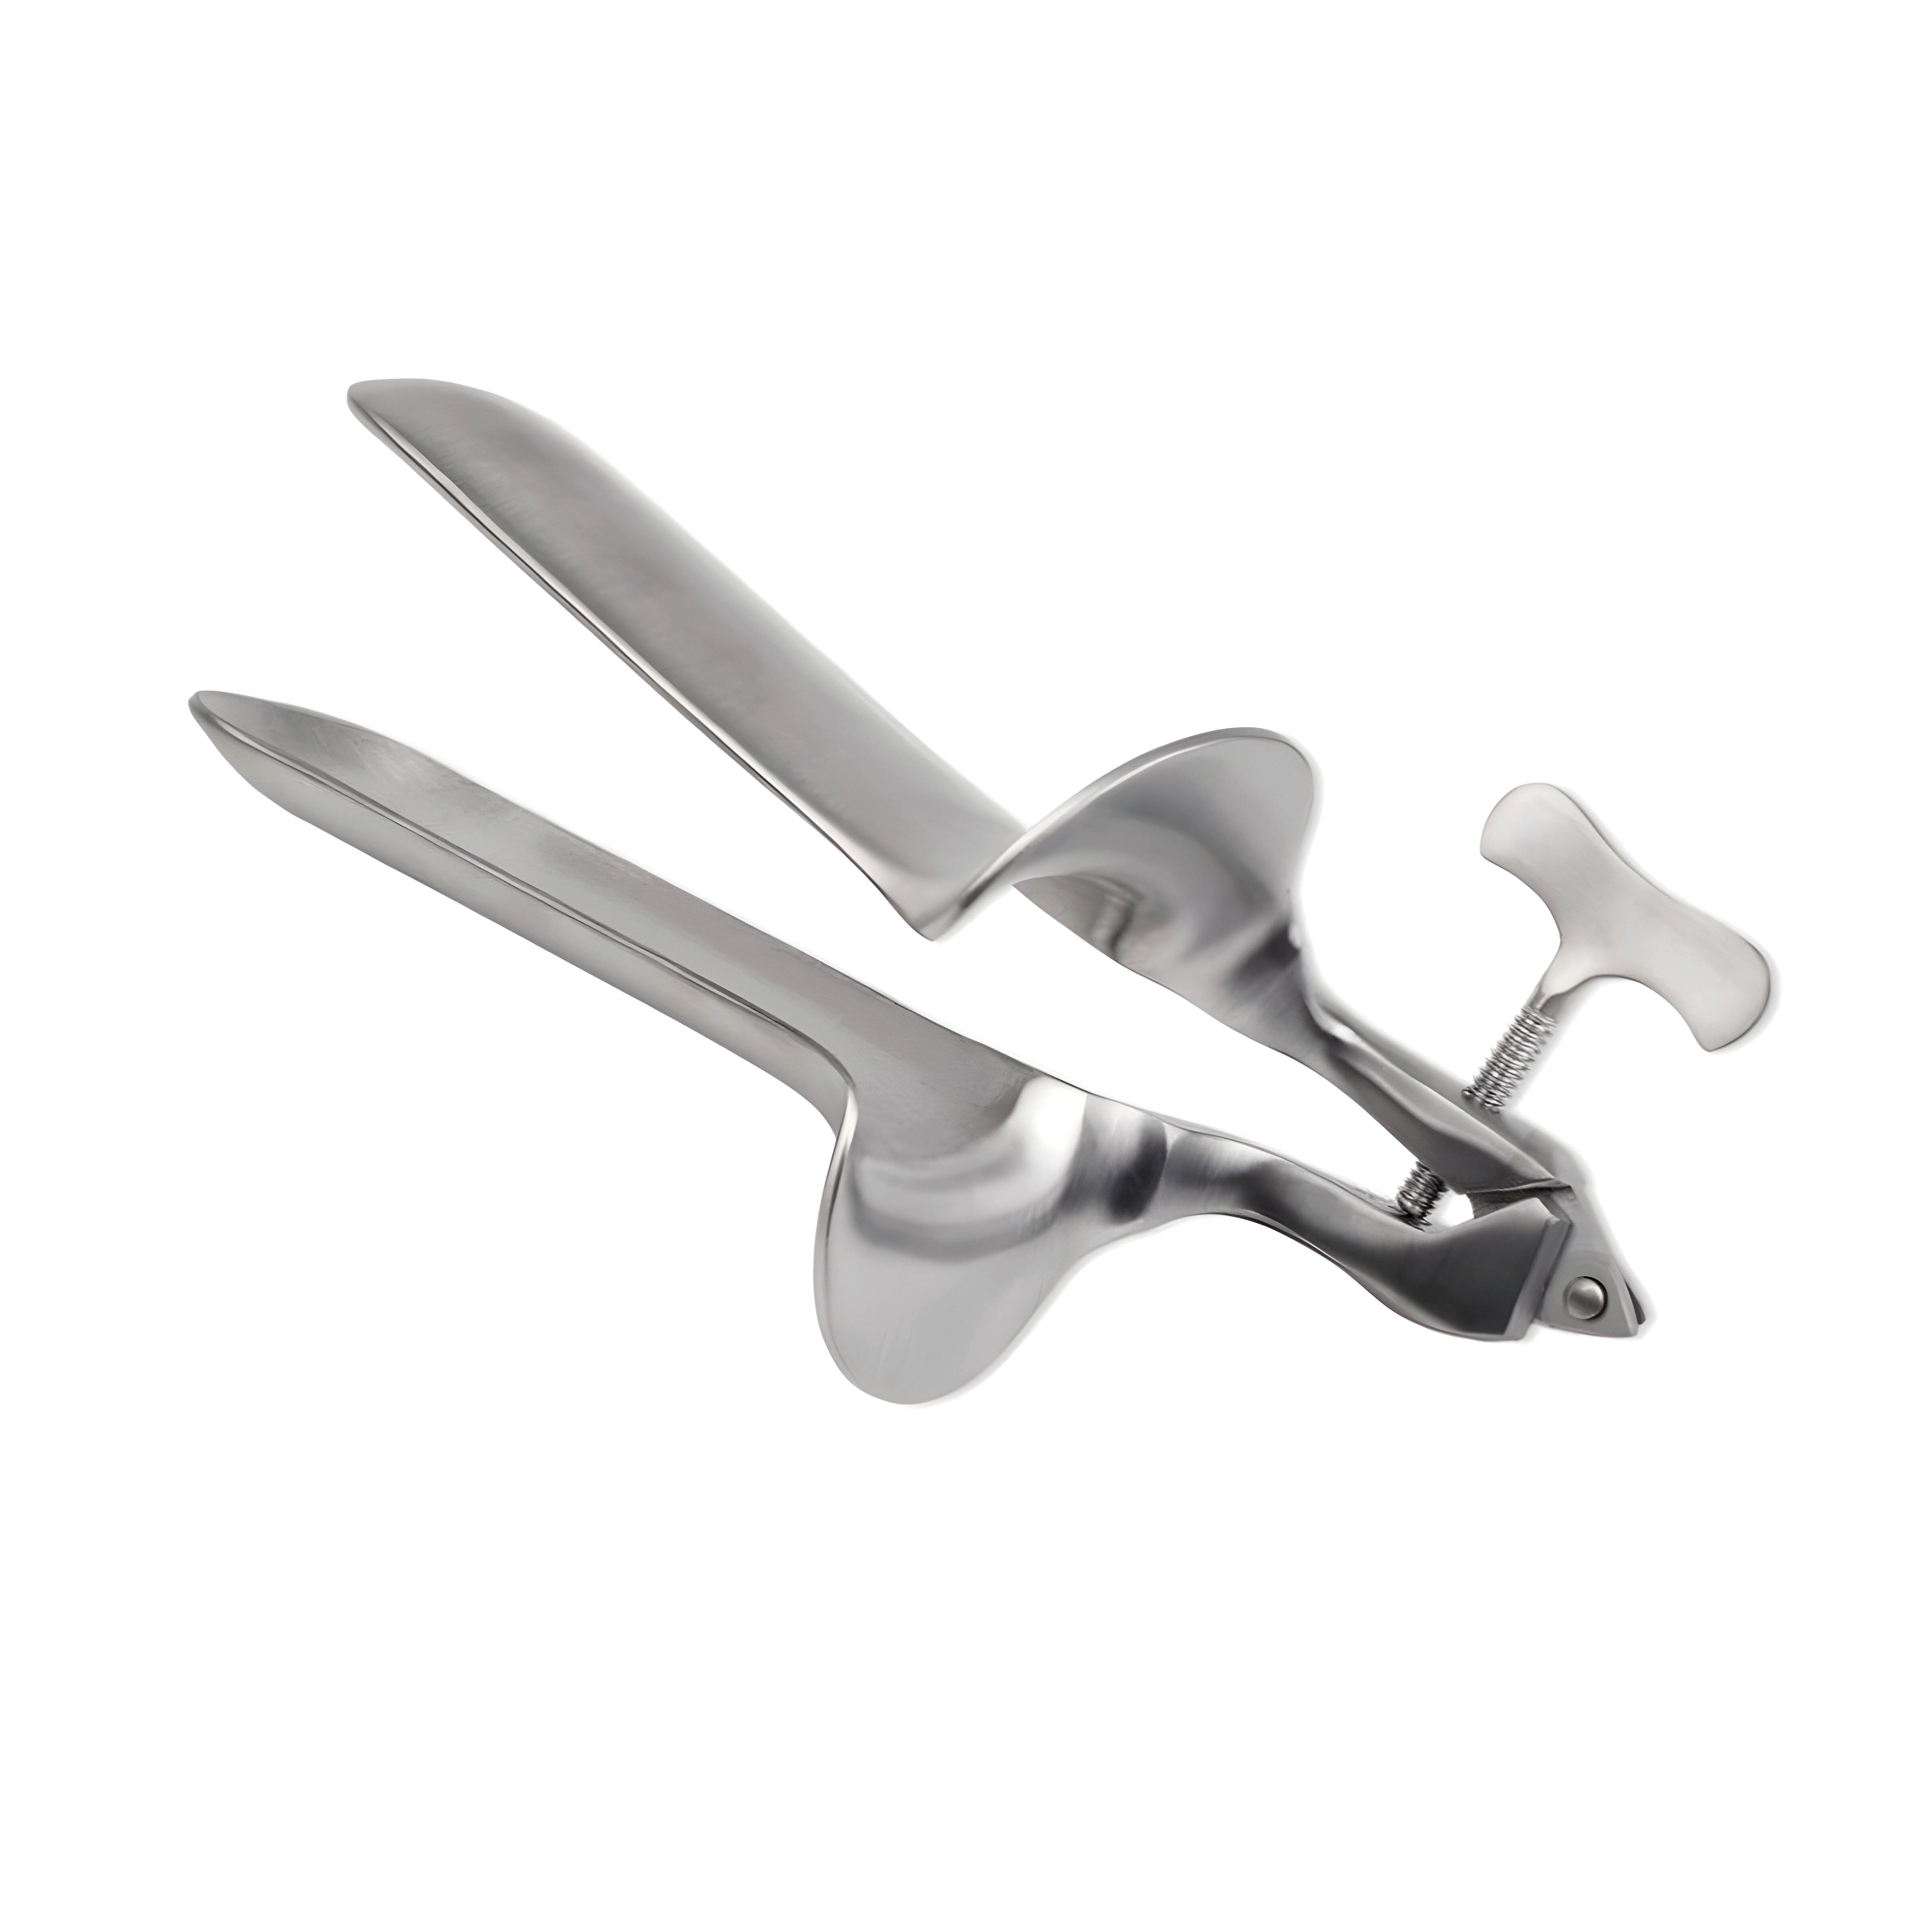 XX-DREAMSTOYS Stainless Steel Speculum